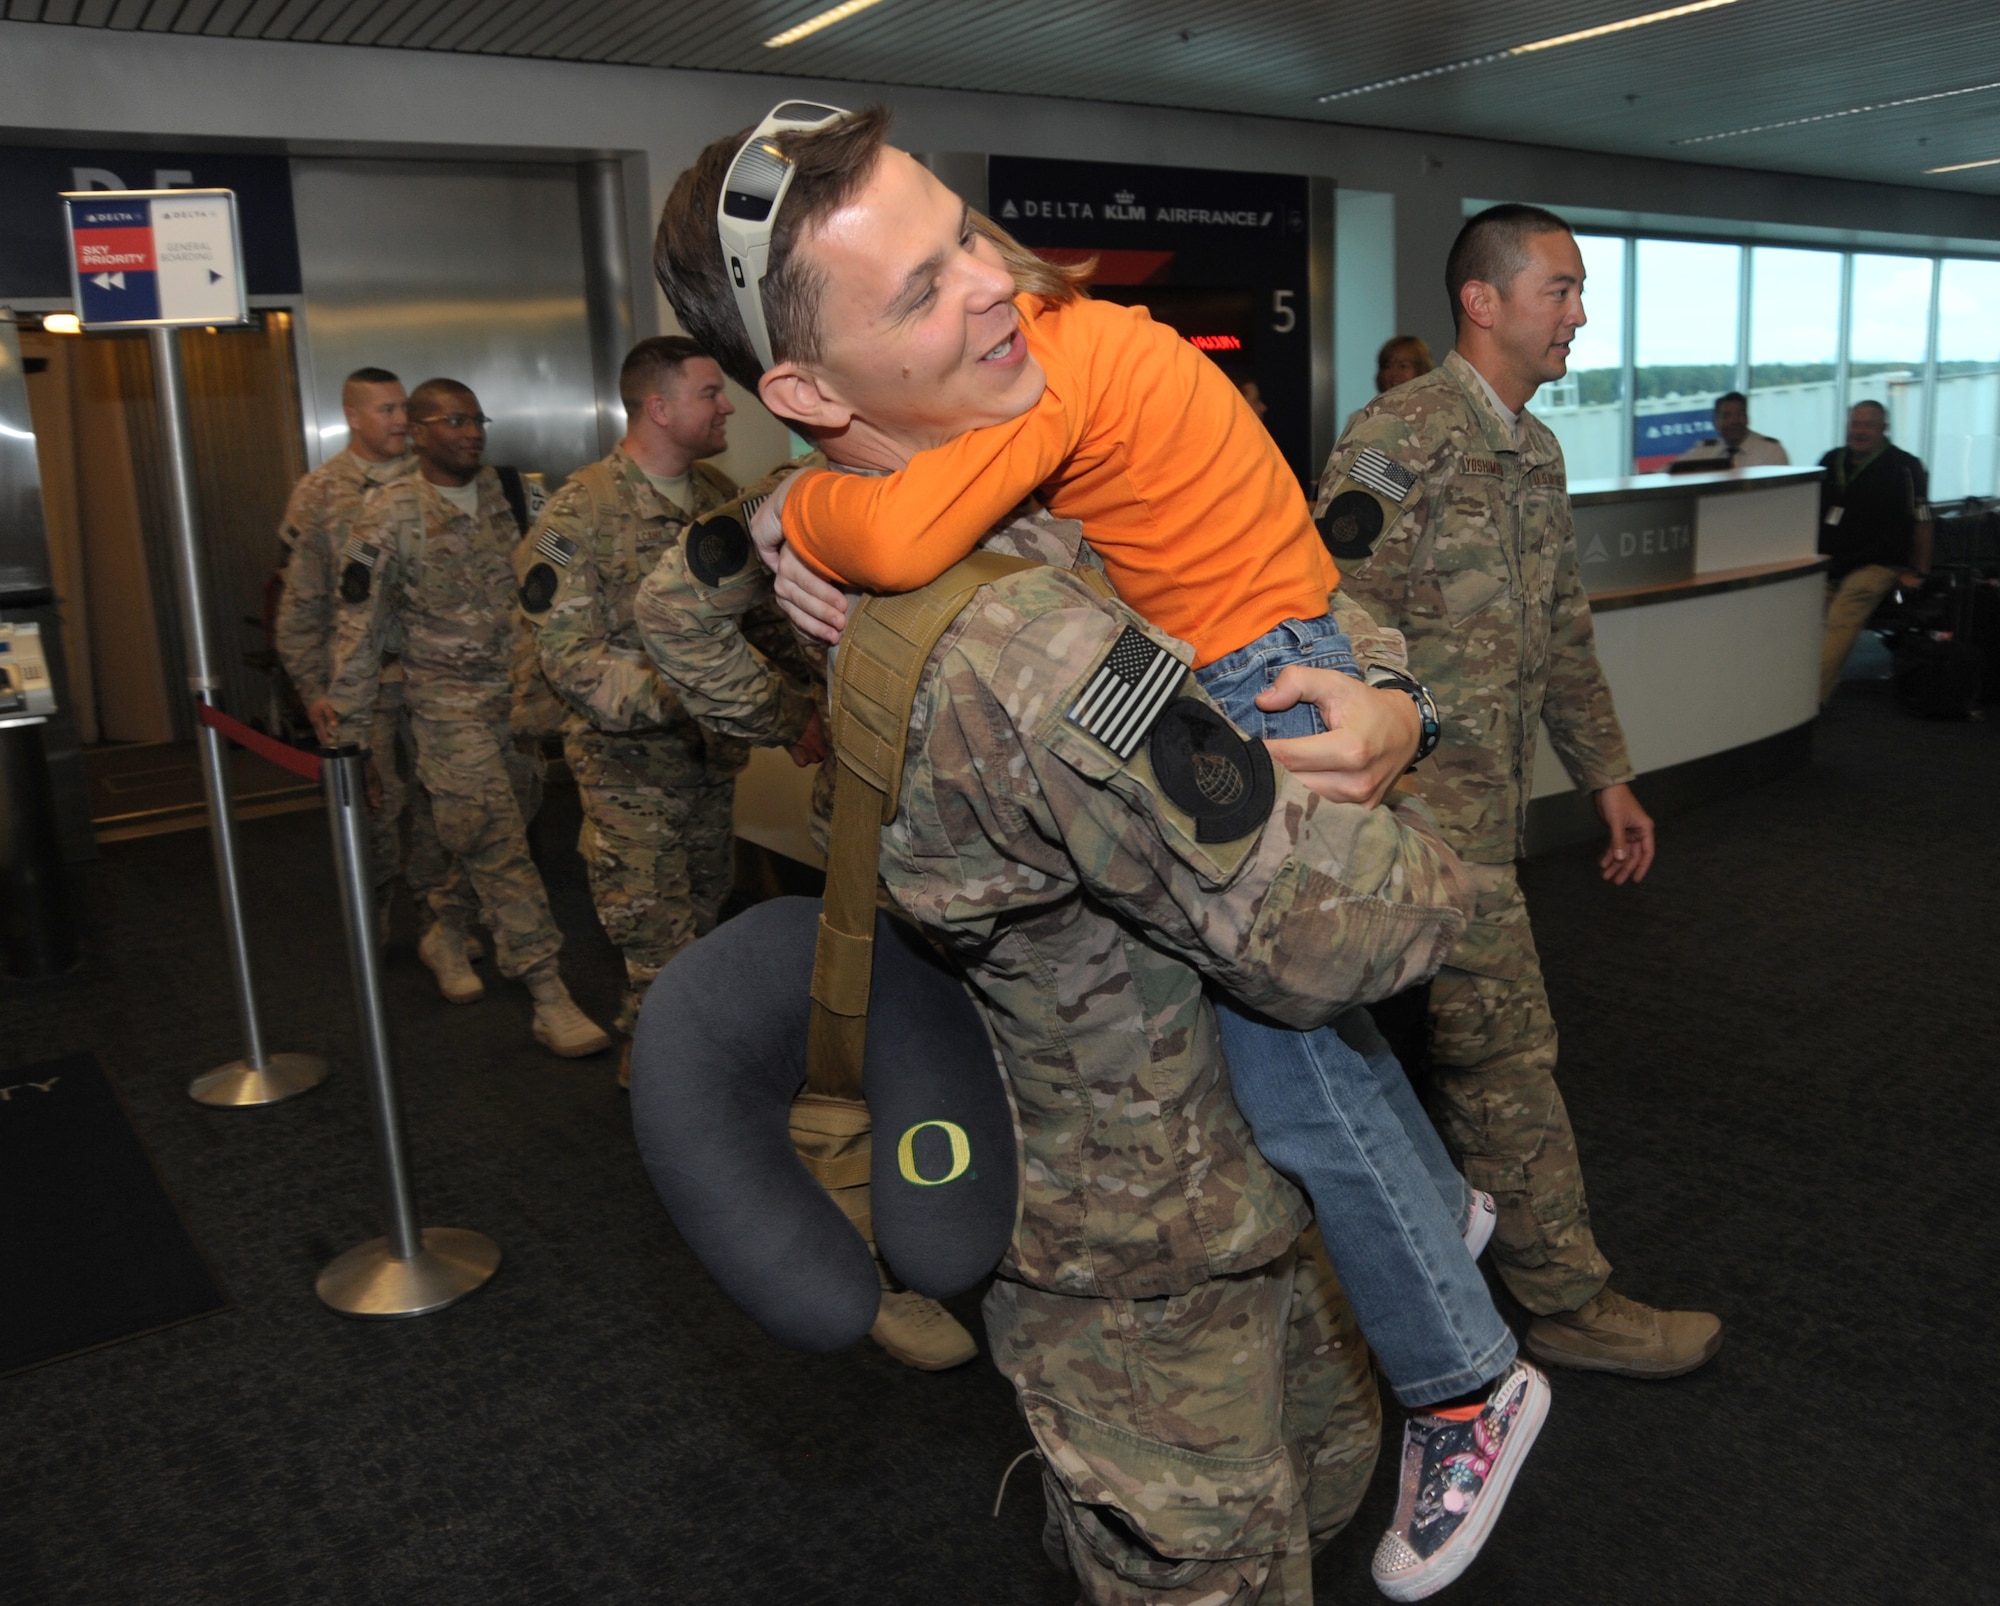 Staff Sgt. Jared Johnson, assigned to the 142nd Fighter Wing Security Forces Squadron is greeted by his daughter after returning home to Portland, Ore., from his OEF deployment, Oct. 31, 2014. (U.S. Air National Guard photo by Tech. Sgt. John Hughel, 142nd Fighter Wing Public Affairs/Released)